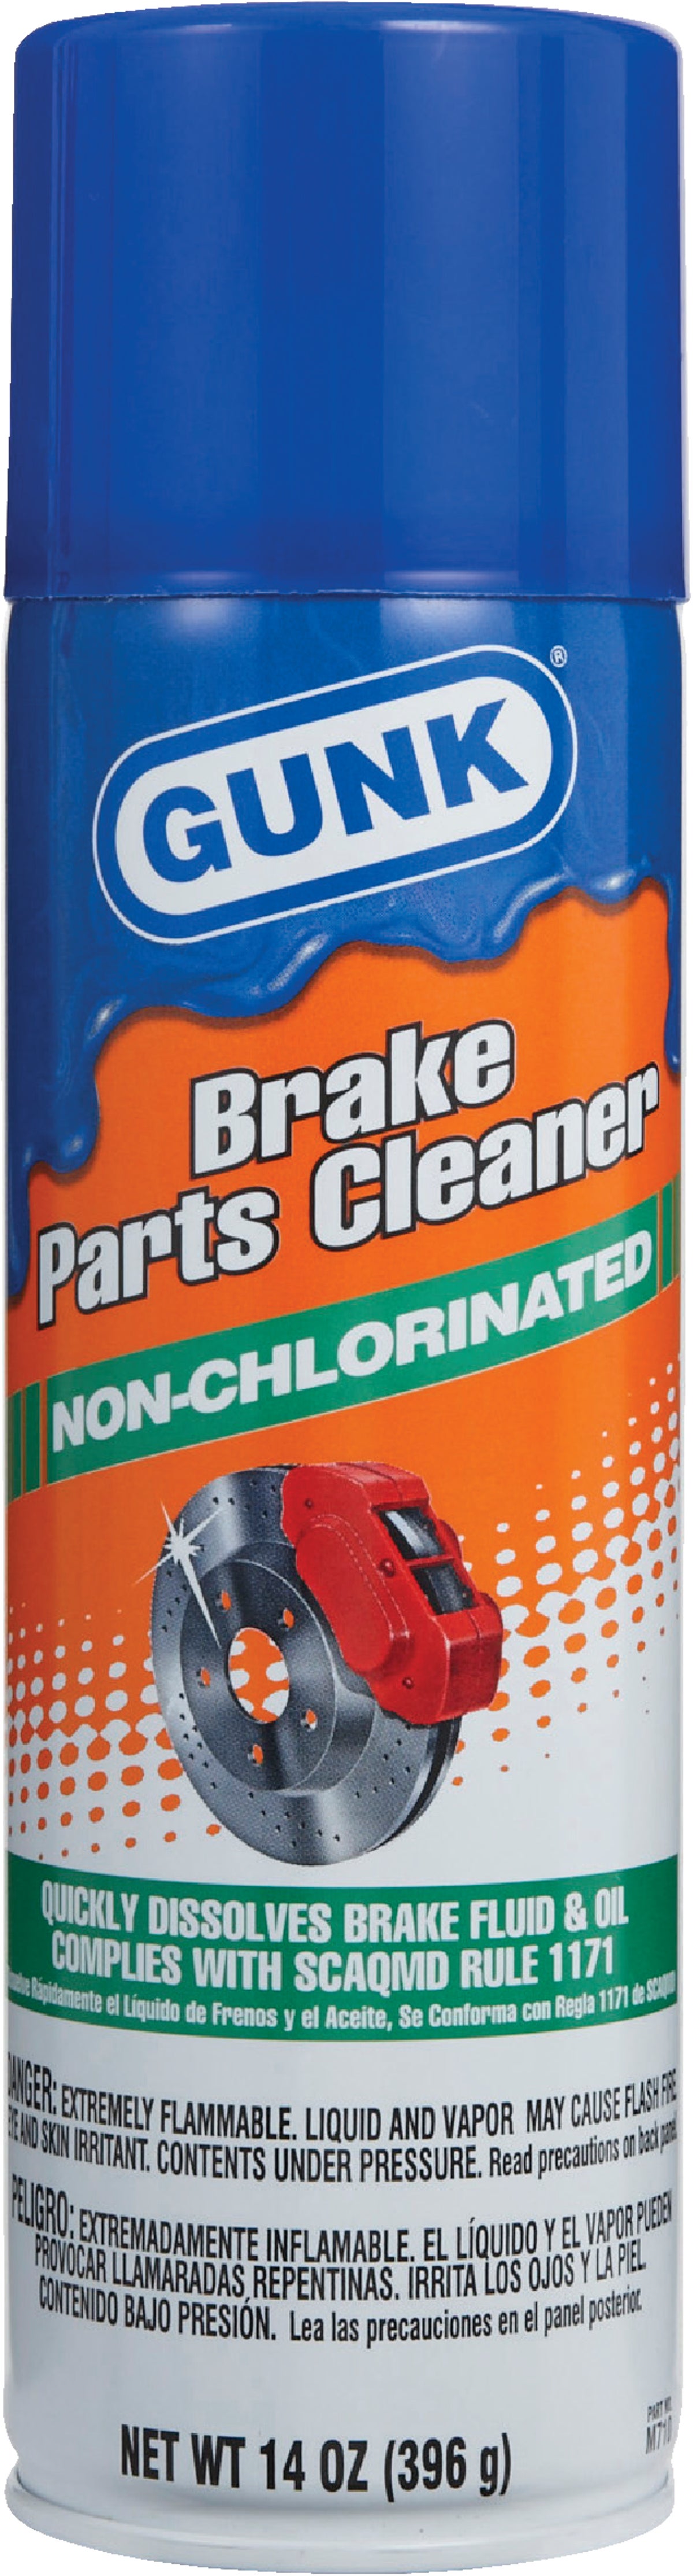 Gunk Non-Chlorinated Brake Parts Cleaner - Midwest Technology Products